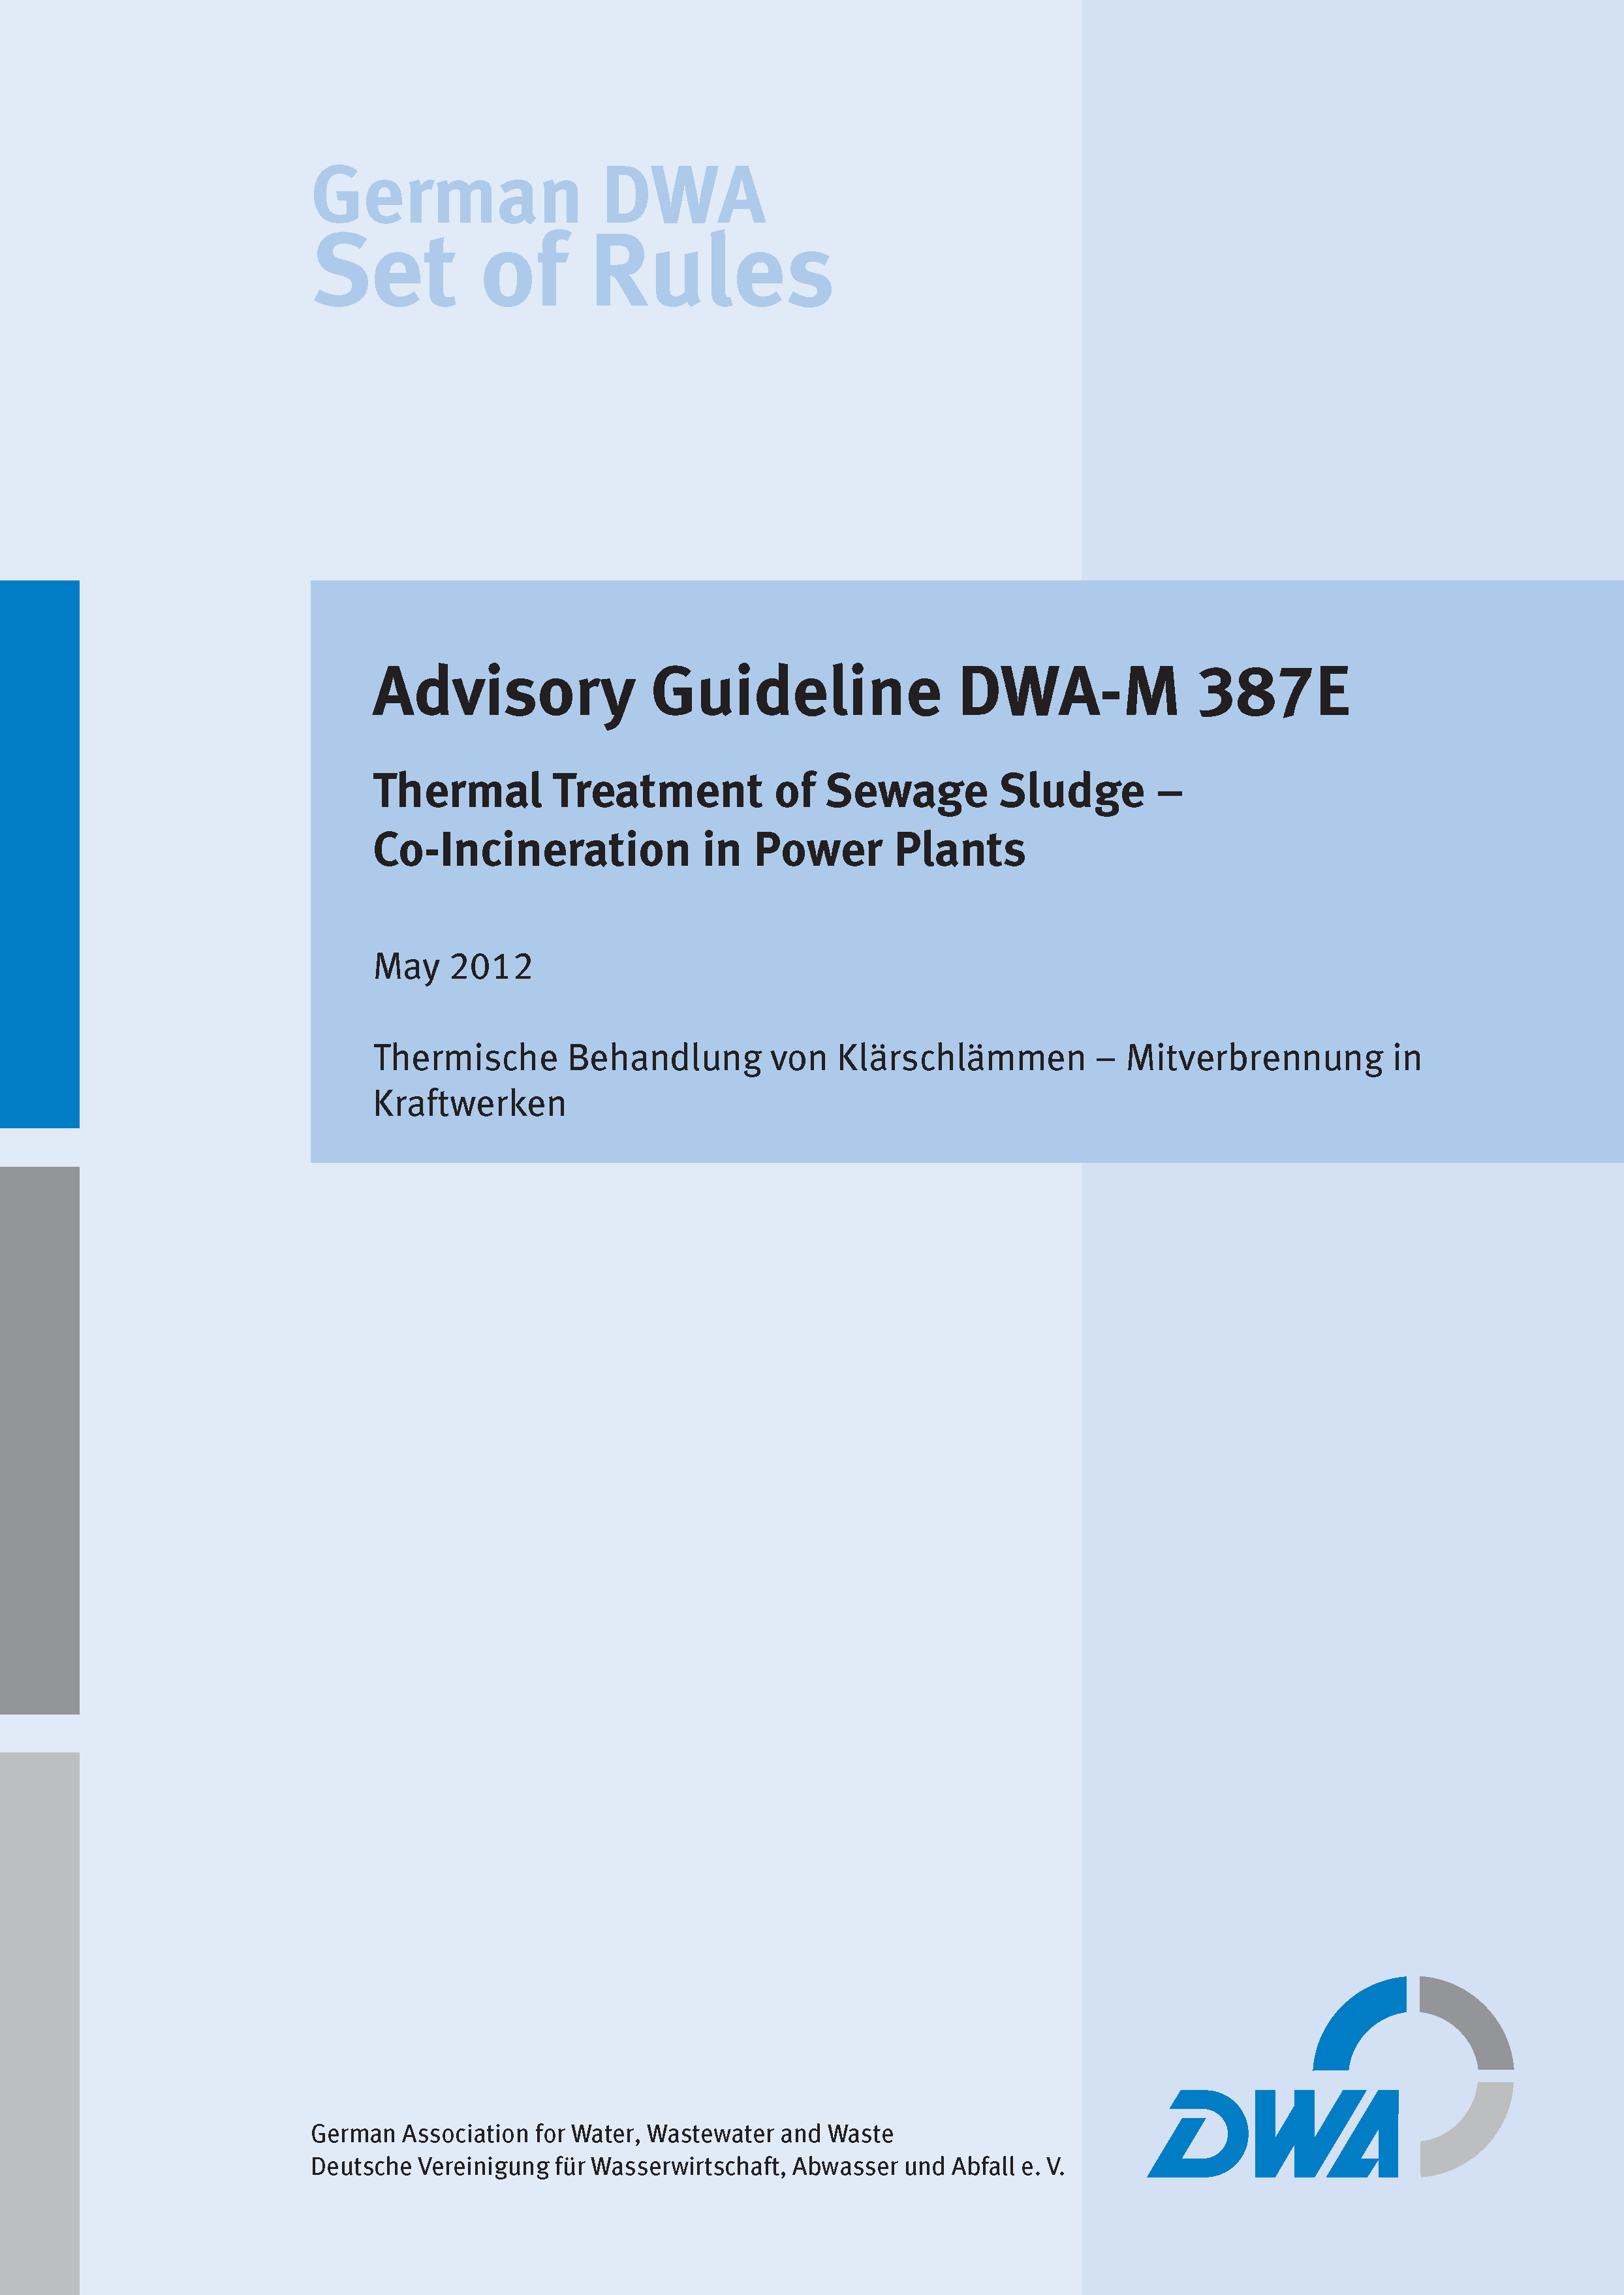 Guideline DWA-M 387E- Thermal Treatment of Sewage Sludge - Co-Incineration in Power Plants - May 2012